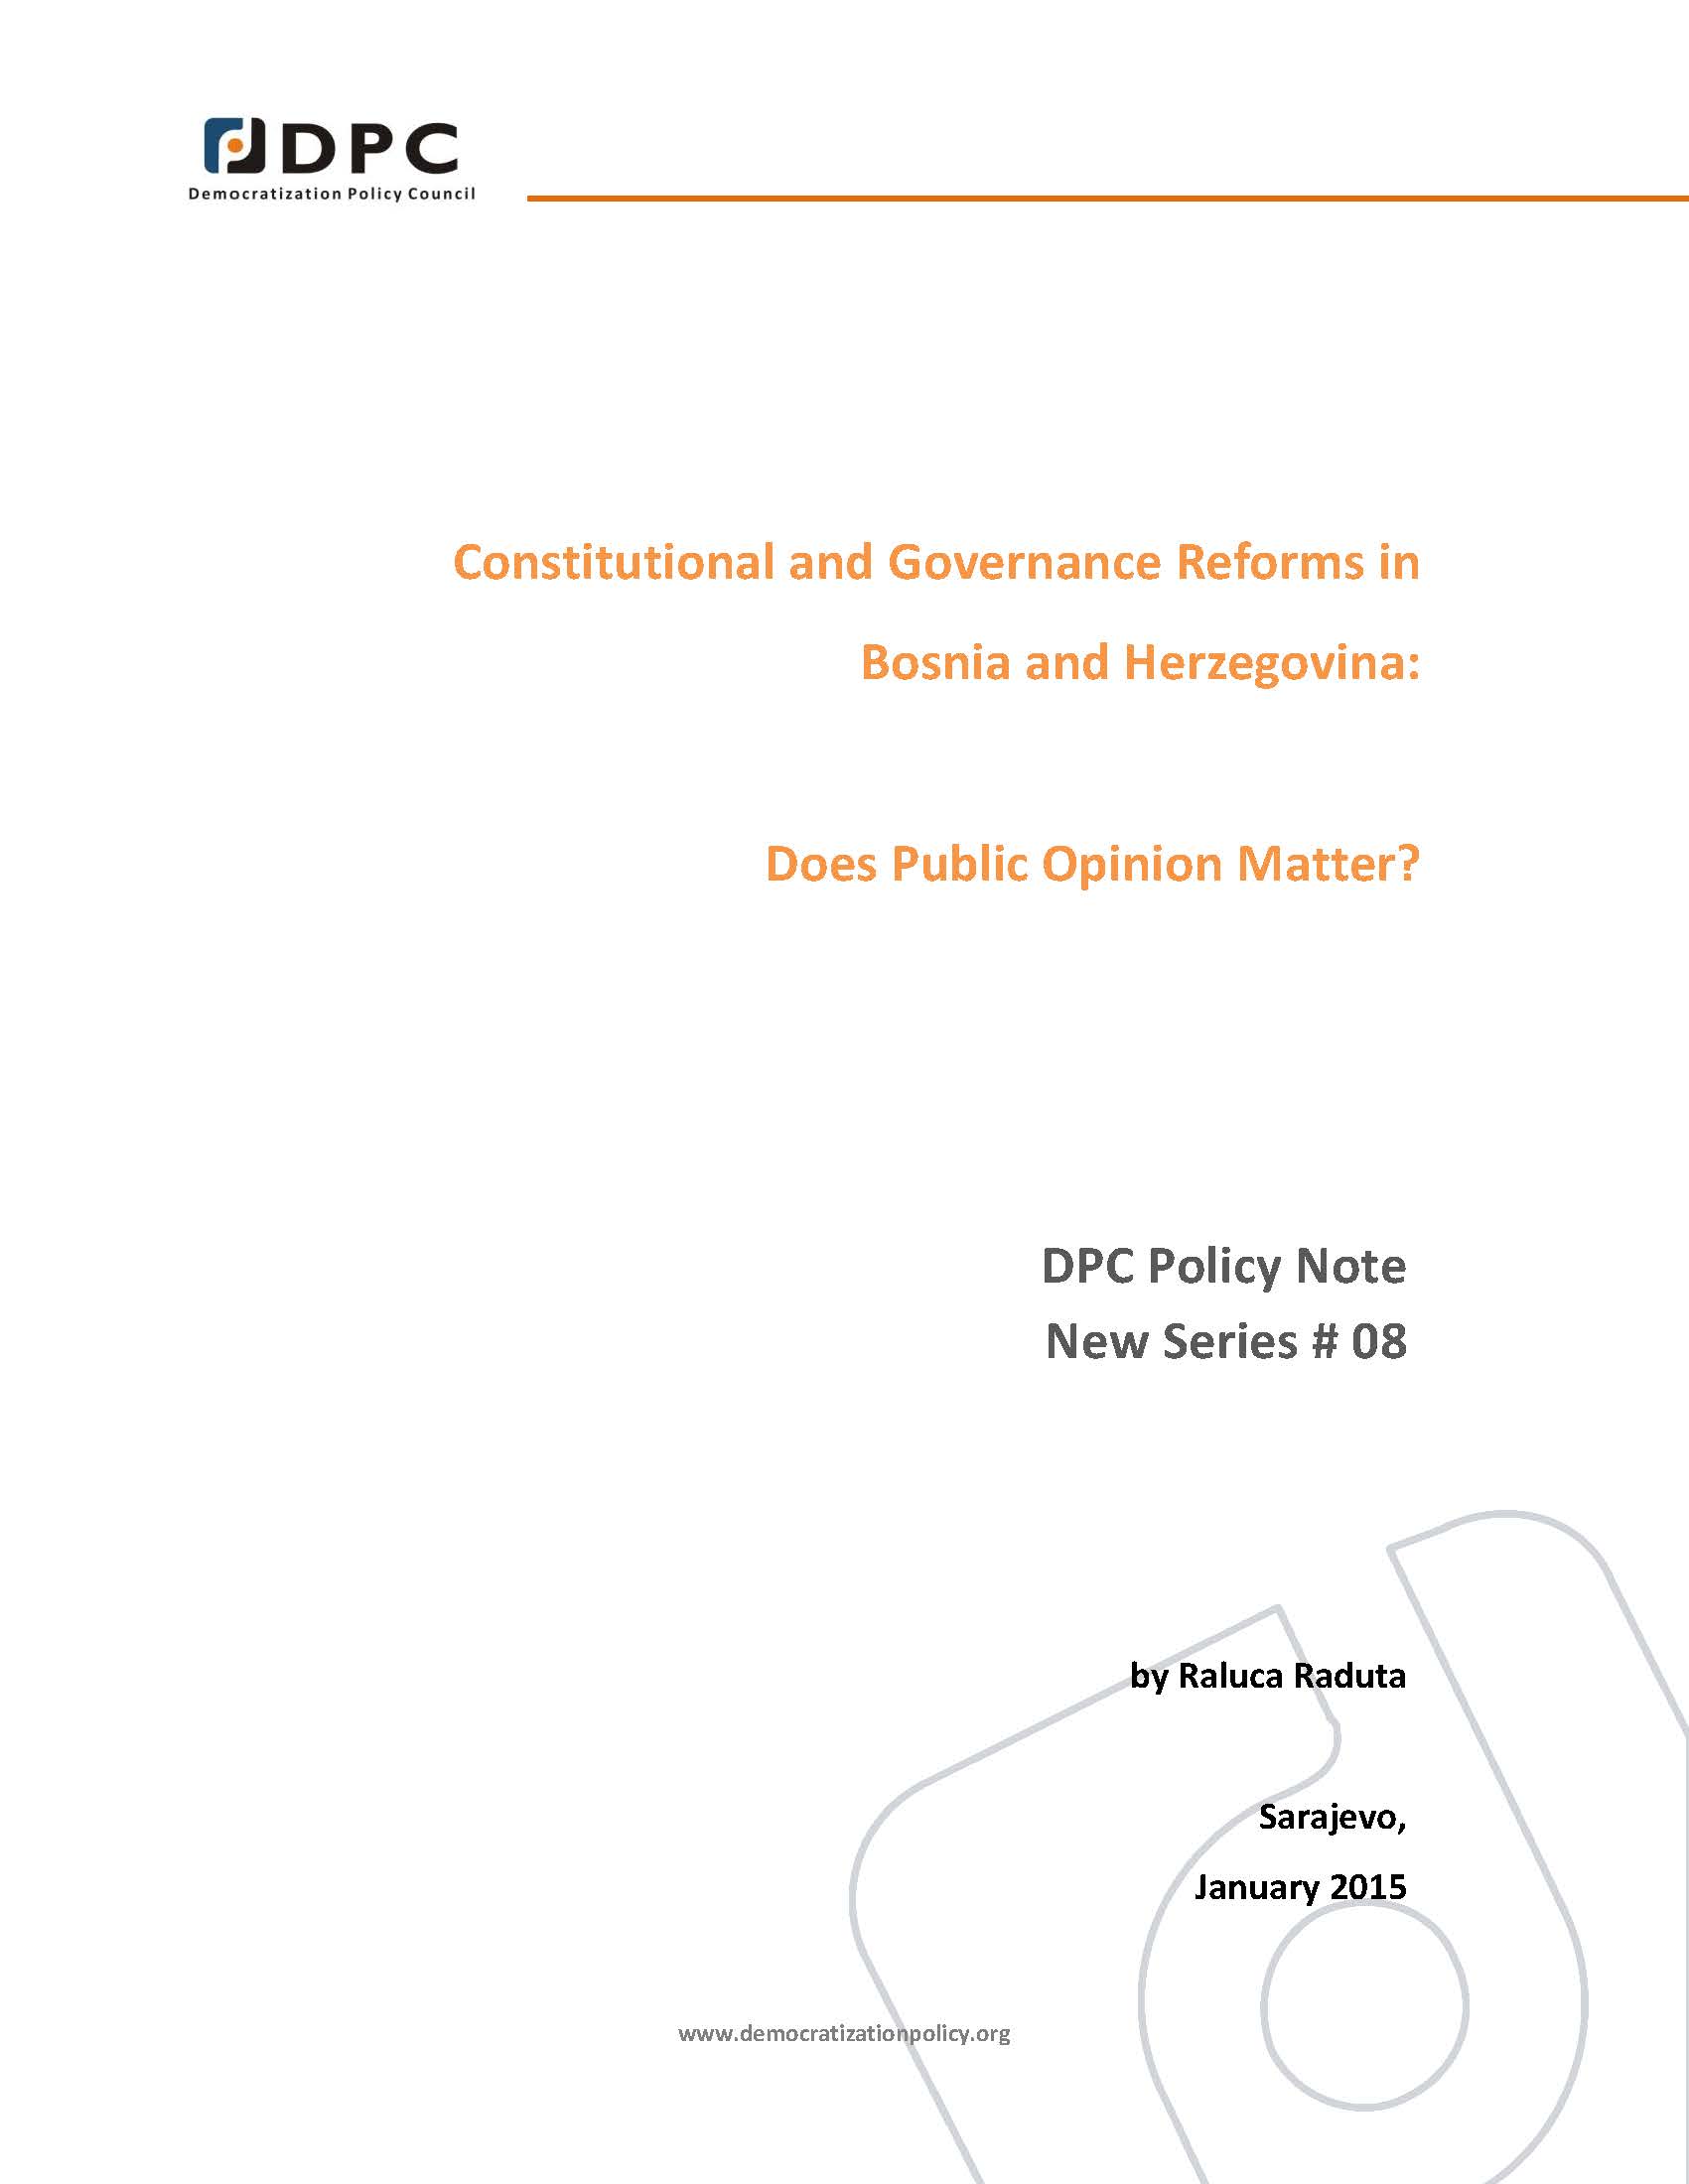 DPC POLICY NOTE 08: Constitutional and Governance Reforms in Bosnia and Herzegovina: Does Public Opinion Matter?